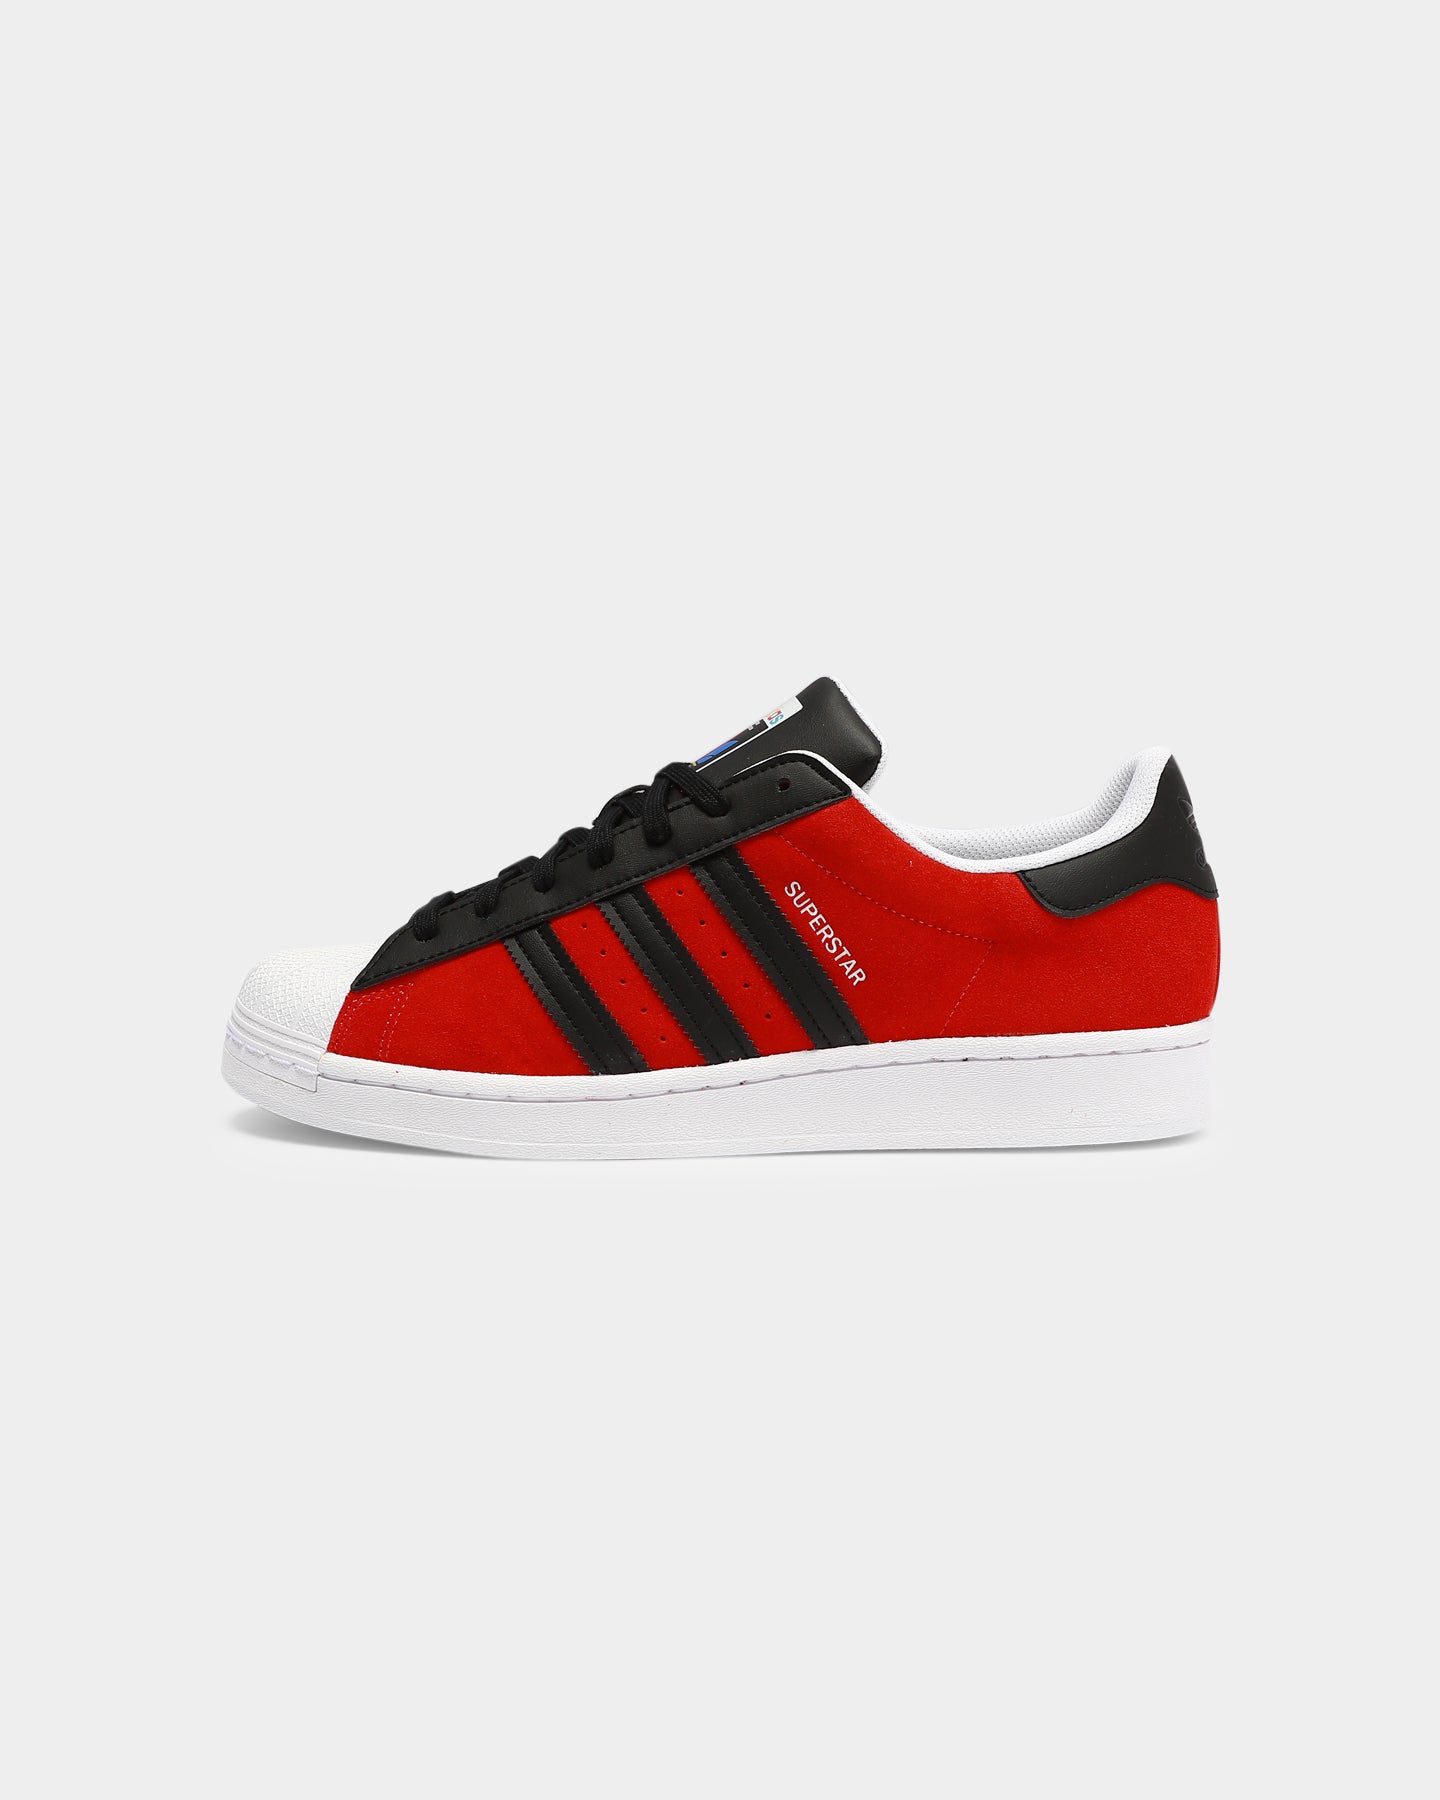 Adidas Superstar Red/Black/Yellow | Culture Kings